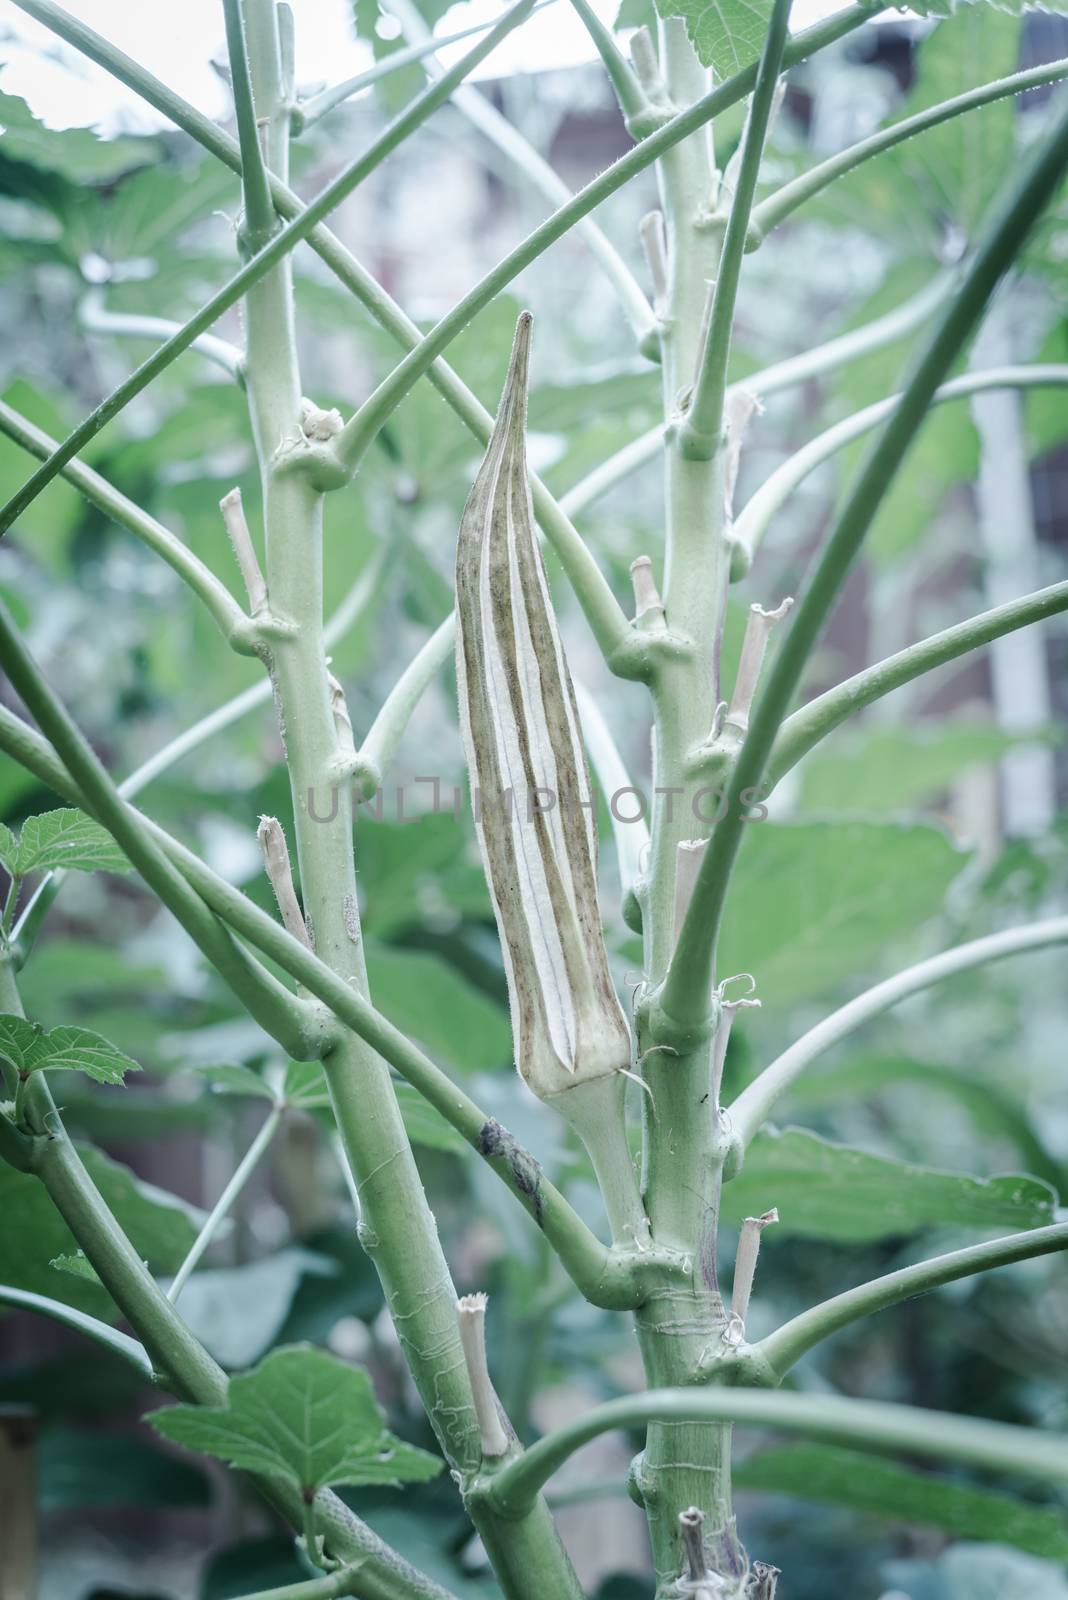 Close-up okra pod mature and dry on the plant for saving okra seeds. Traditional way to collect lady fingers seeds and dry out harvesting, storing at organic backyard garden near Dallas, Texas, USA